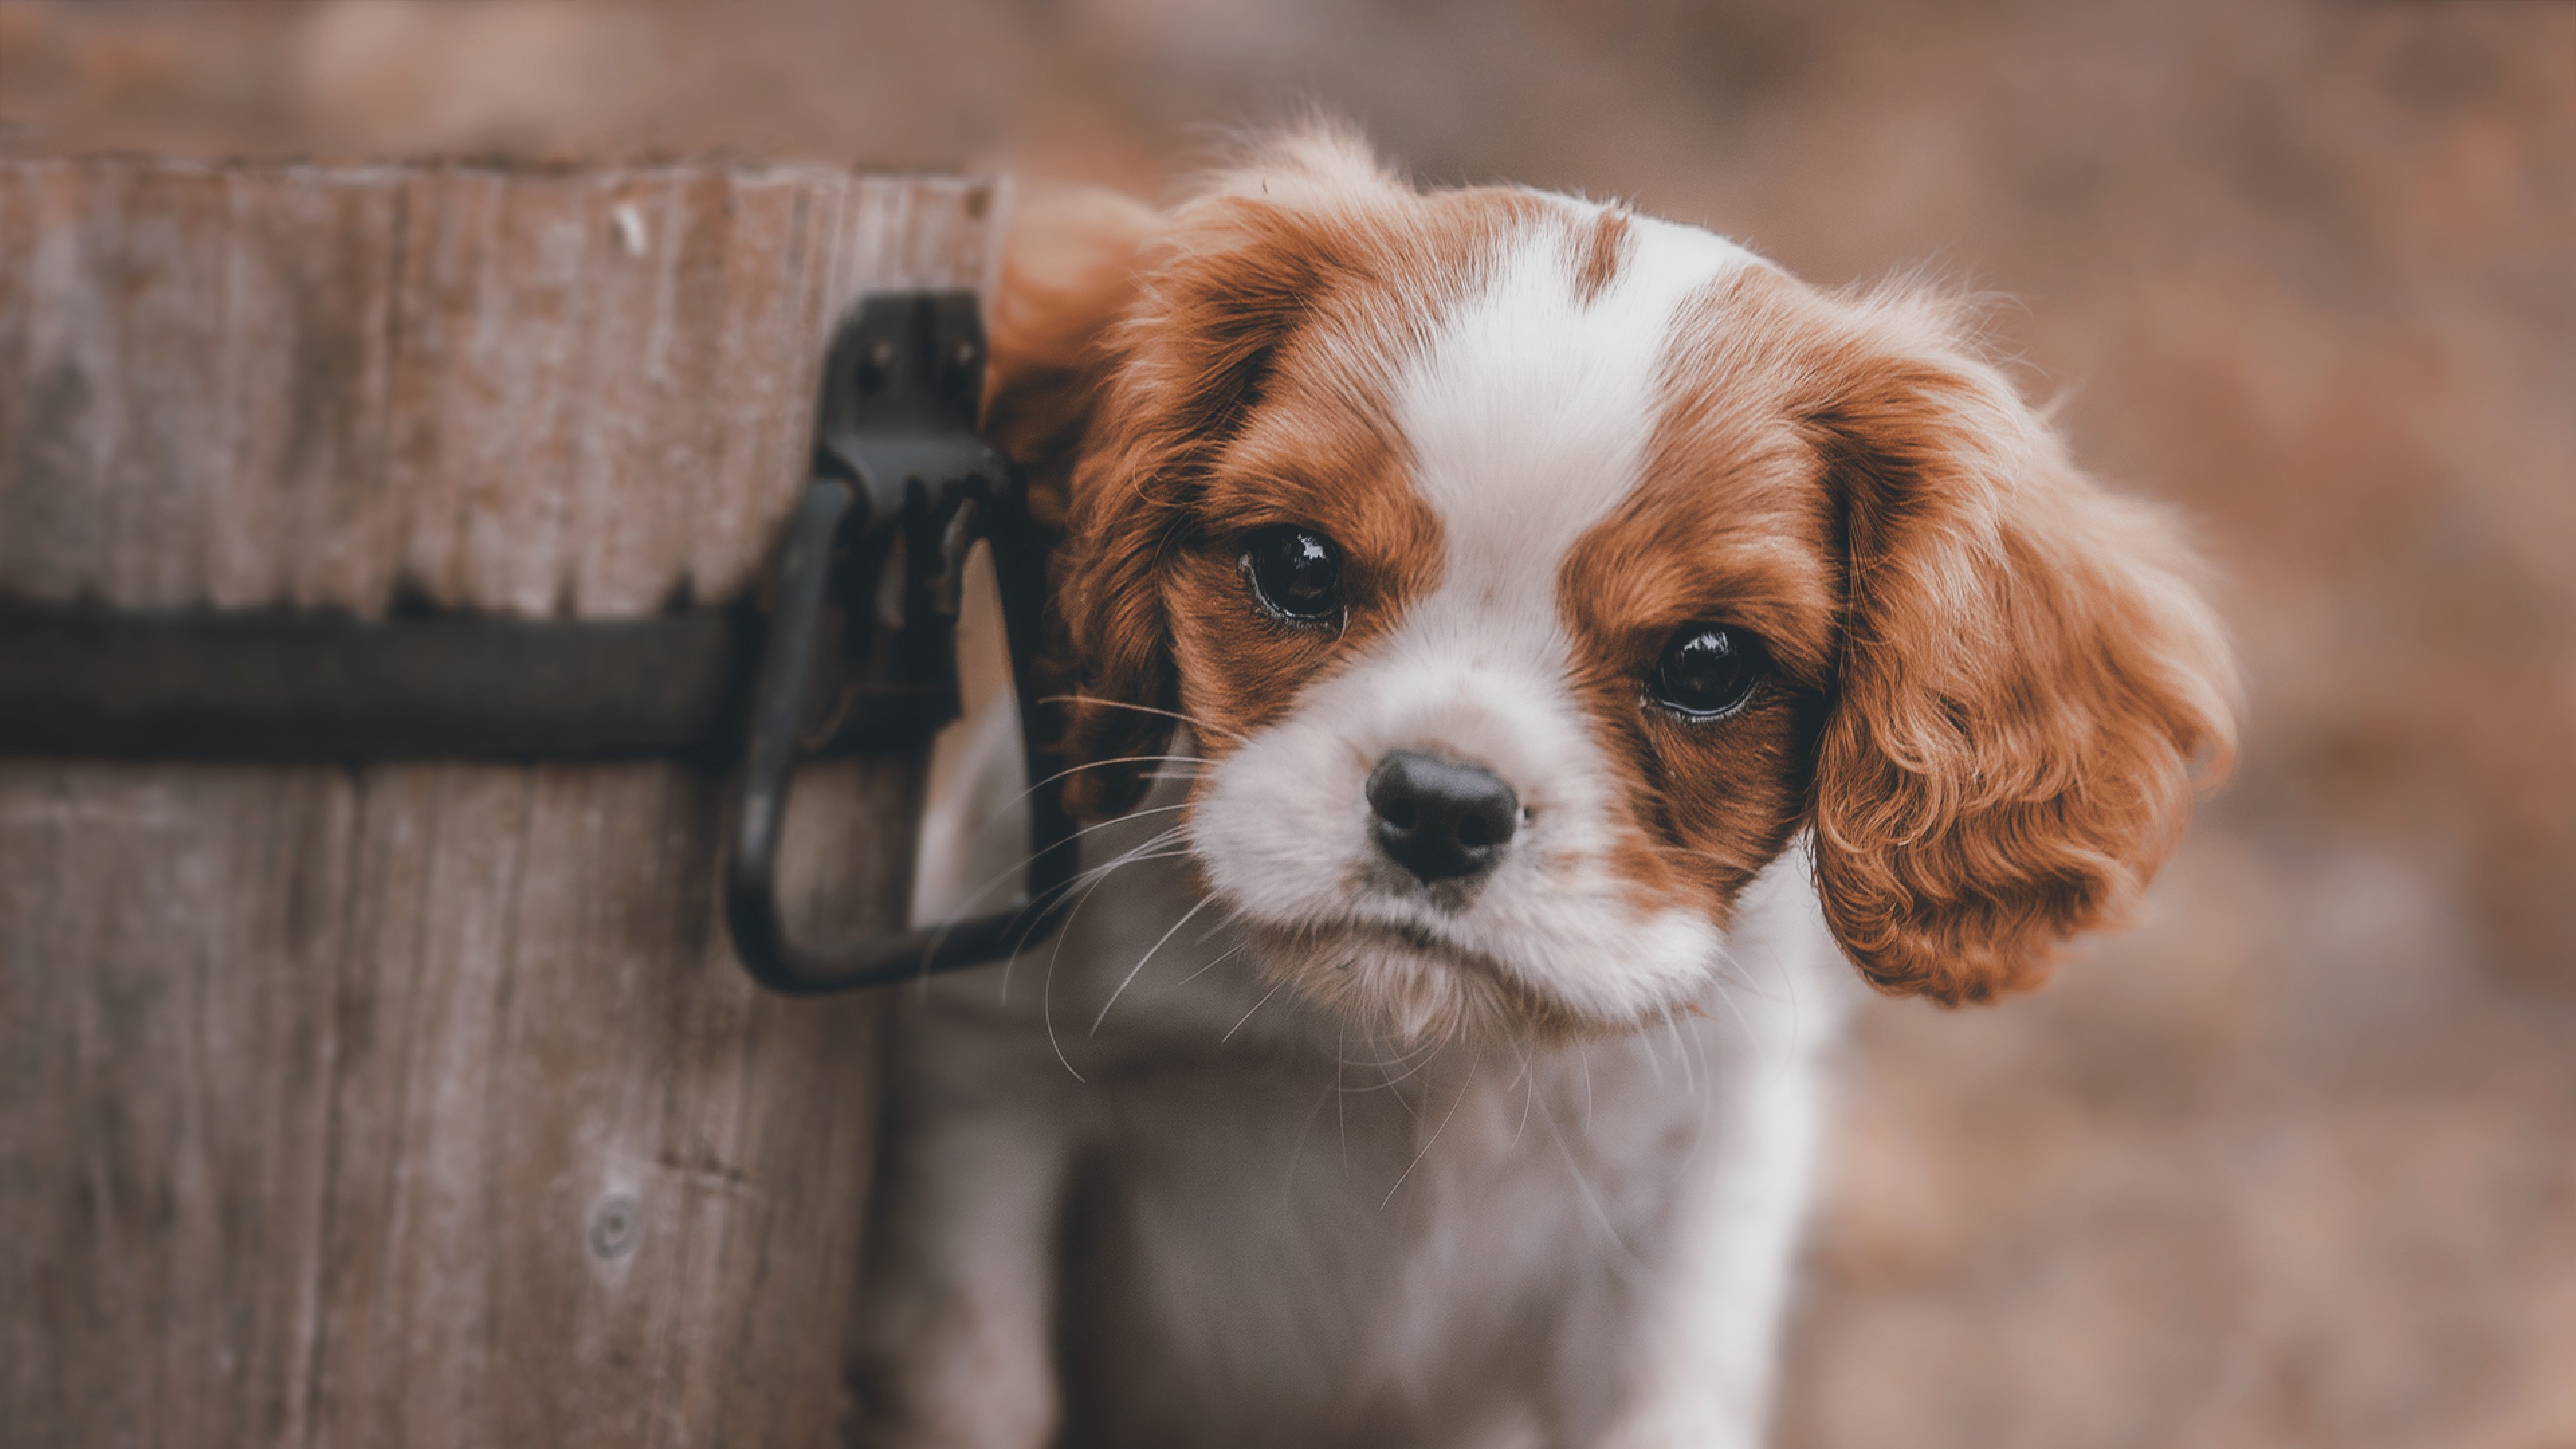 cute puppy 4k 1542237716 - Cute Puppy 4k - dog wallpapers, cute wallpapers, animals wallpapers